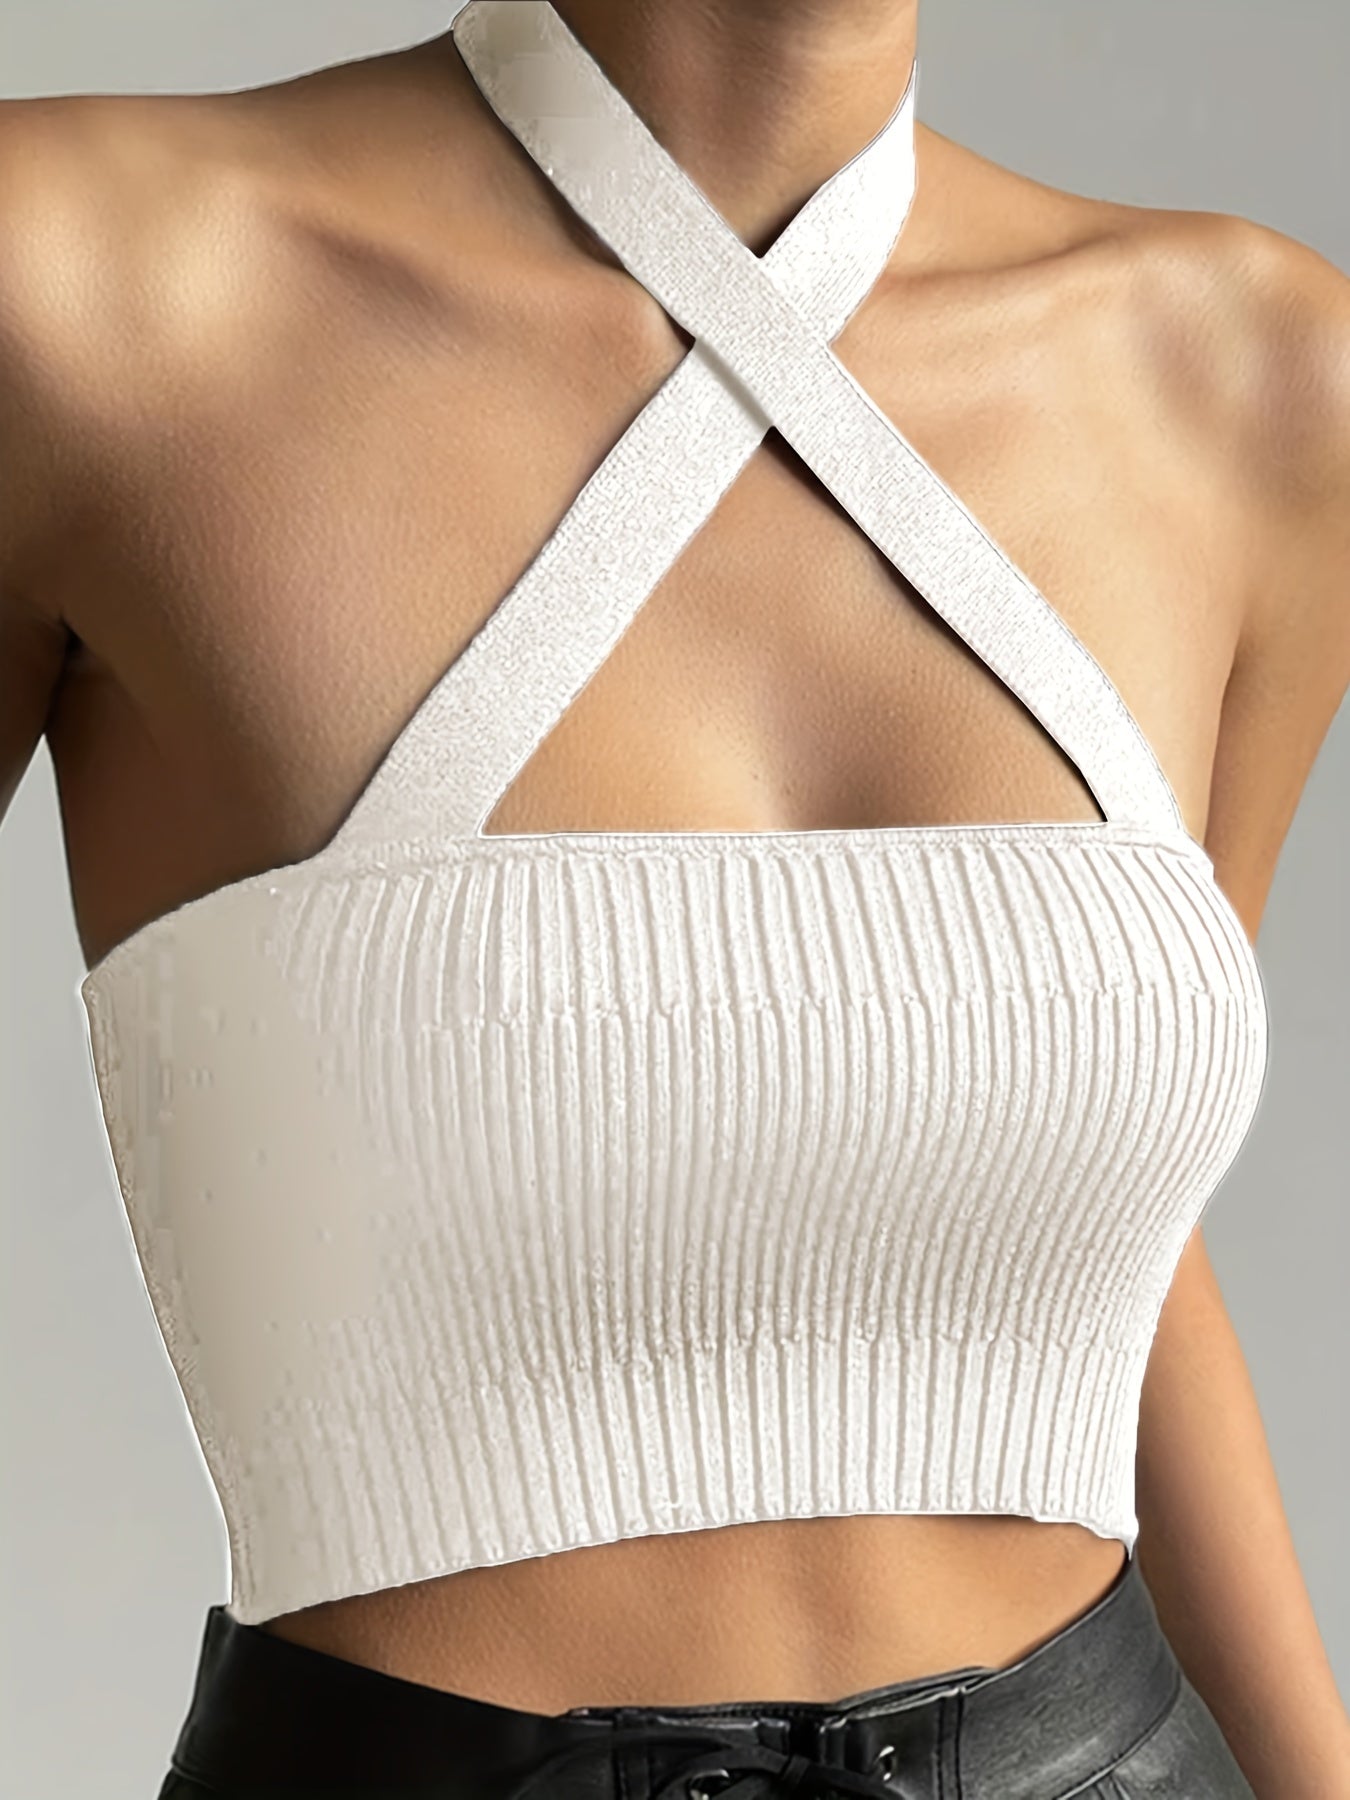 Antmvs Knitted Crop Halter Top, Sleeveless Casual Crop Sweater, Women's Clothing